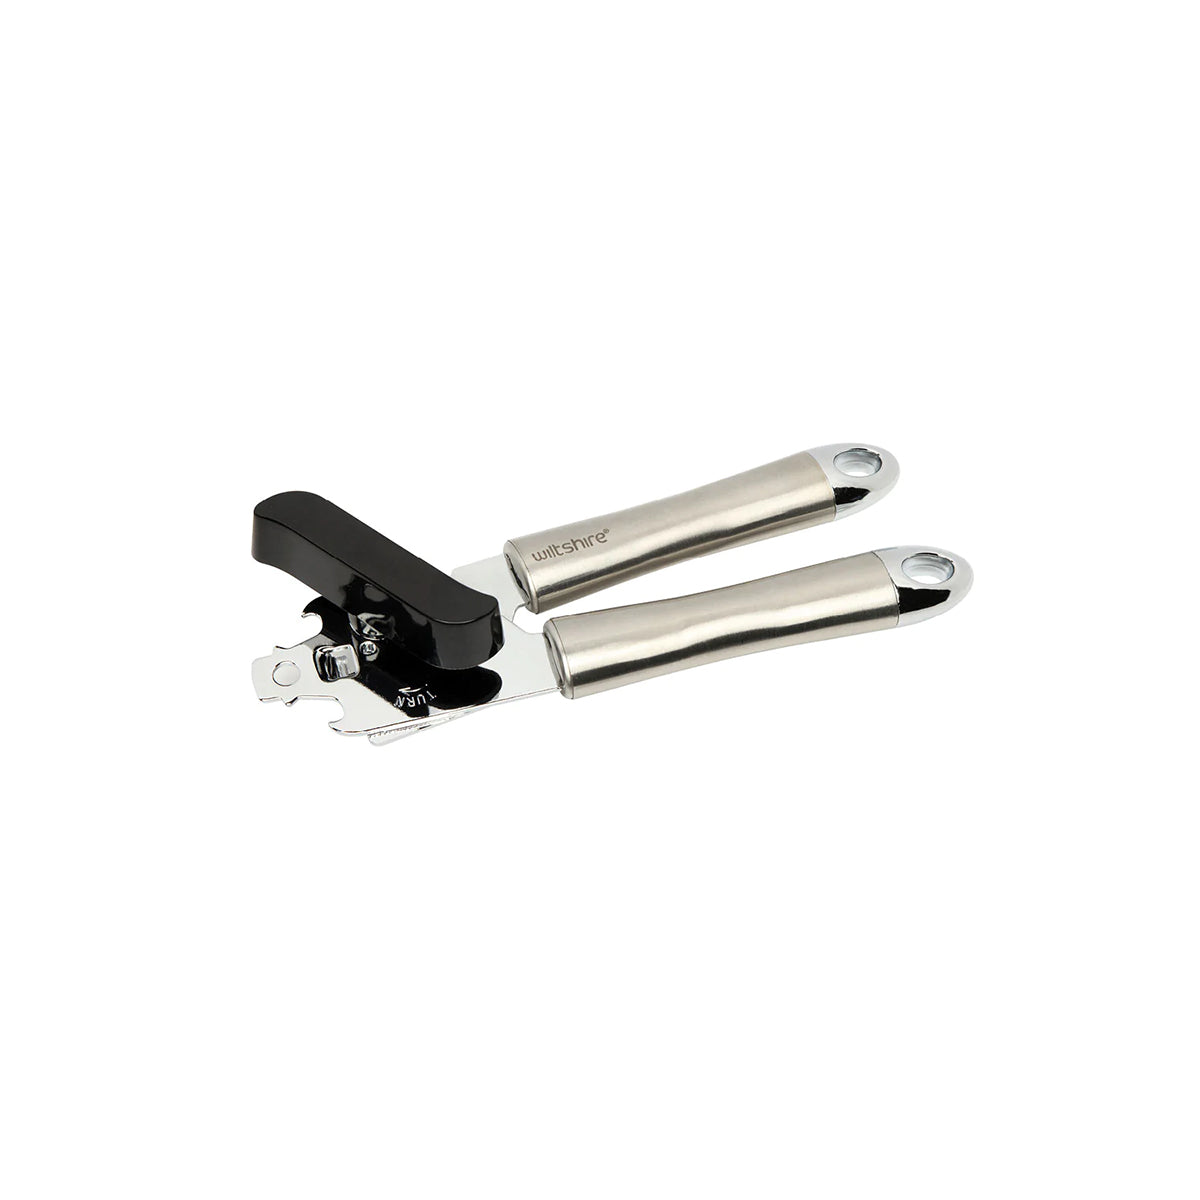 WLT43754 Wiltshire Industrial Can Opener Stainless Steel Tomkin Australia Hospitality Supplies